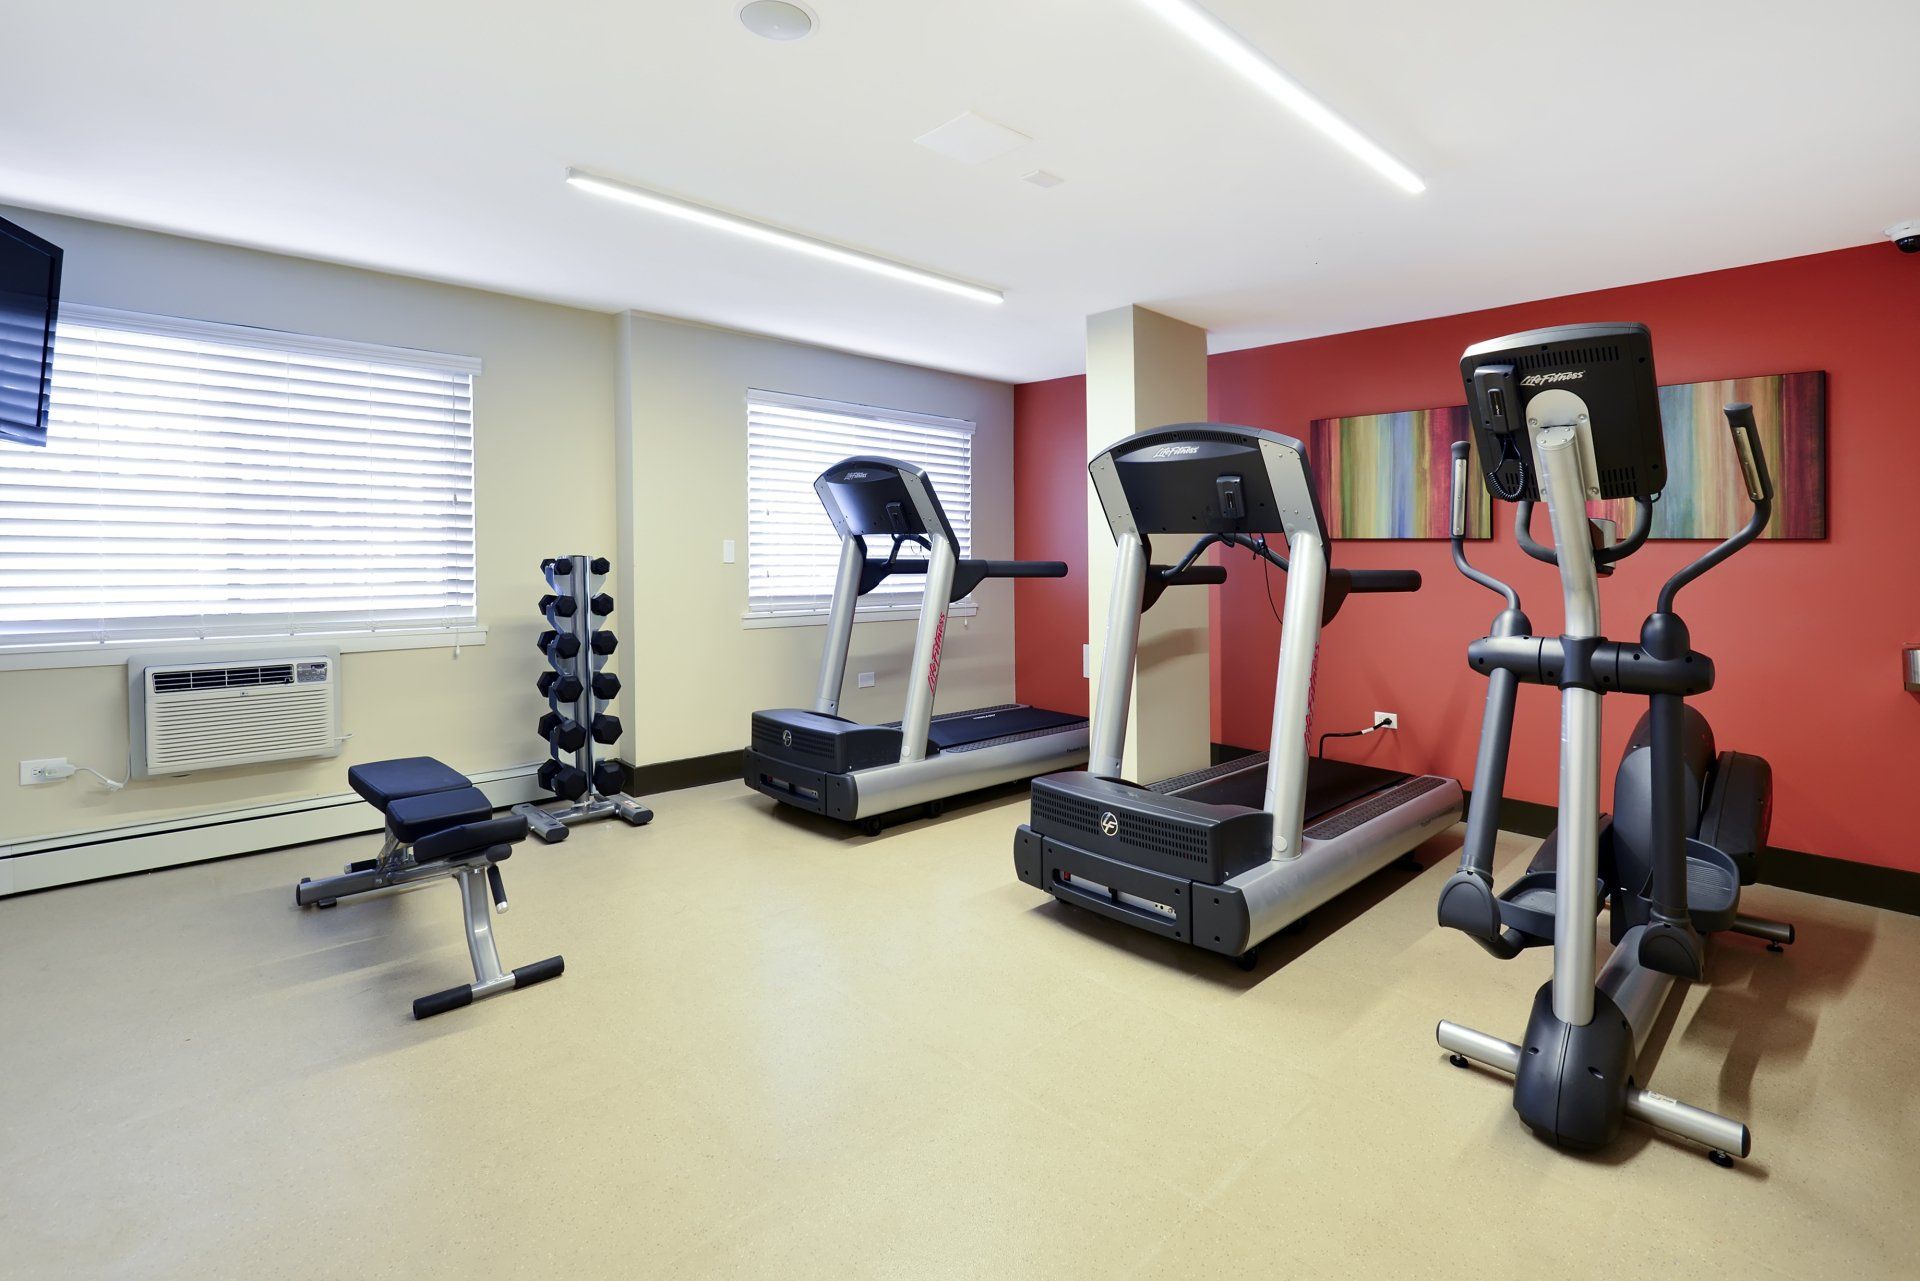 Fitness center with equipment at Reside on Stratford.